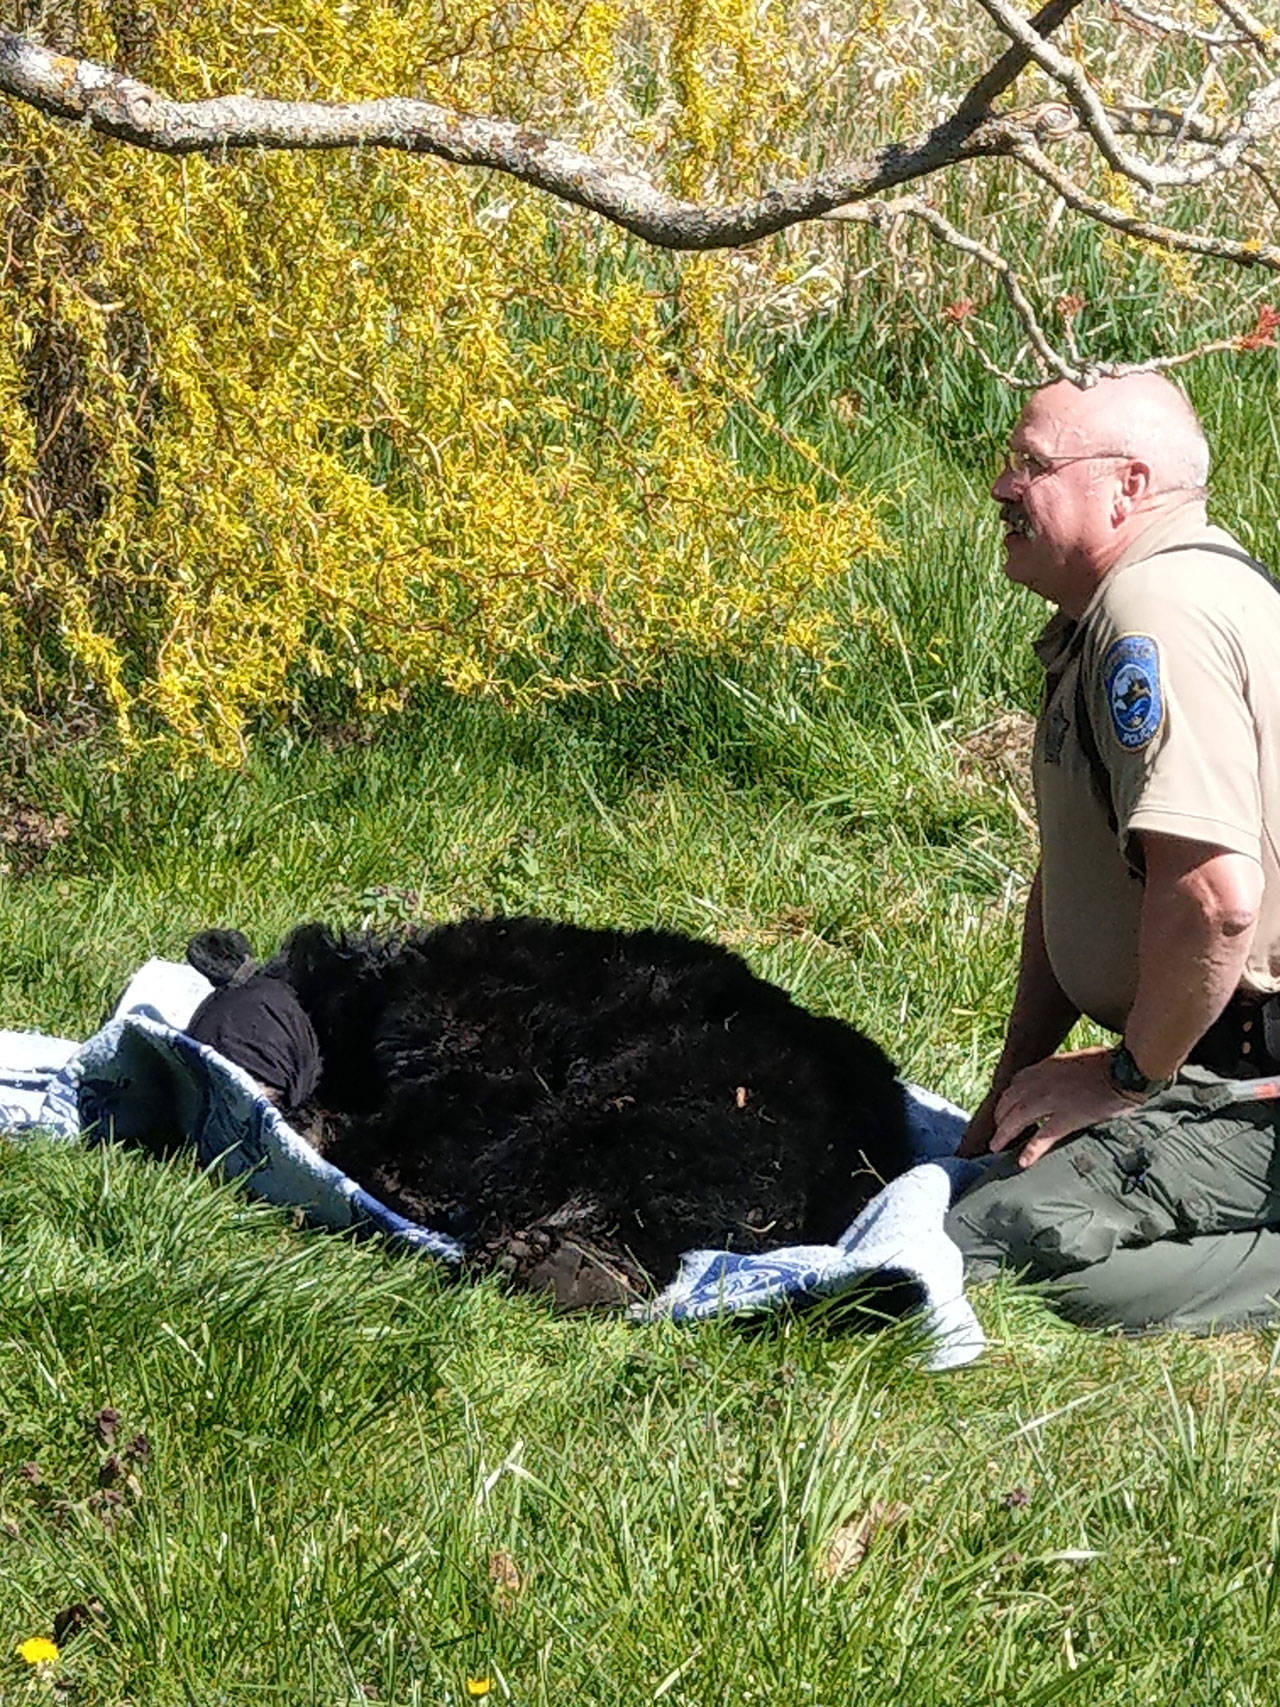 Wildlife officers keep tabs on a 2-year-old black bear it sedated after the animal approached homes near the 3 Crabs area April 11, 2020. The bear was darted and transported into the upper Dungeness watershed. (Photo courtesy of Washington Department of Fish and Wildlife)